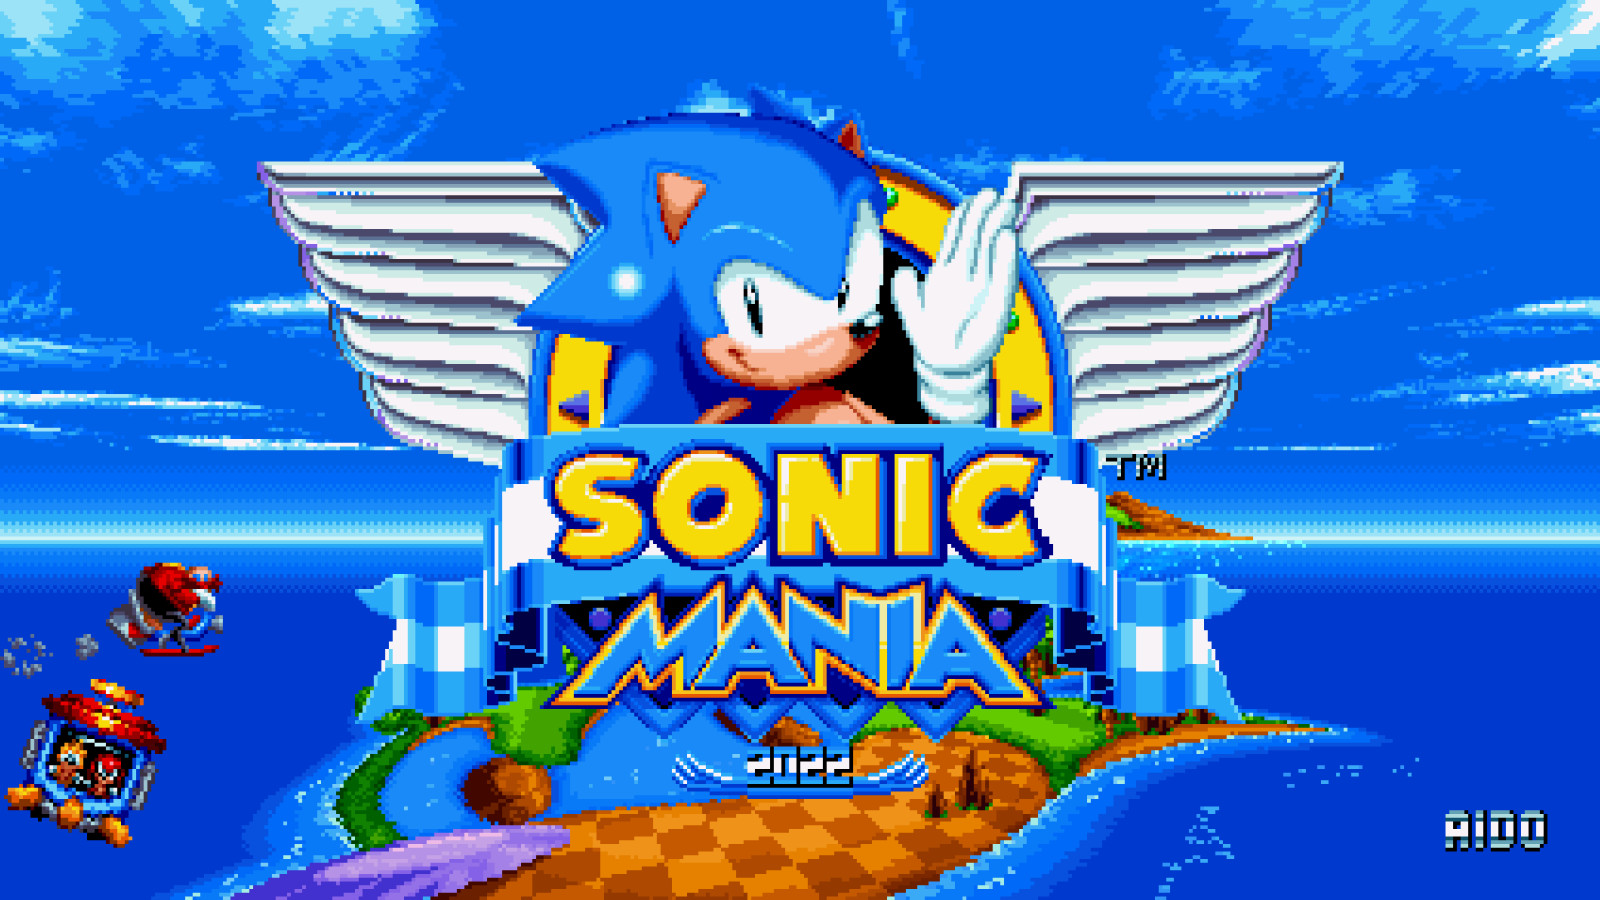 Christian Whitehead Is On Good Terms With Sega, And They Never Planned To  Make Sonic Mania 2 - Gameranx